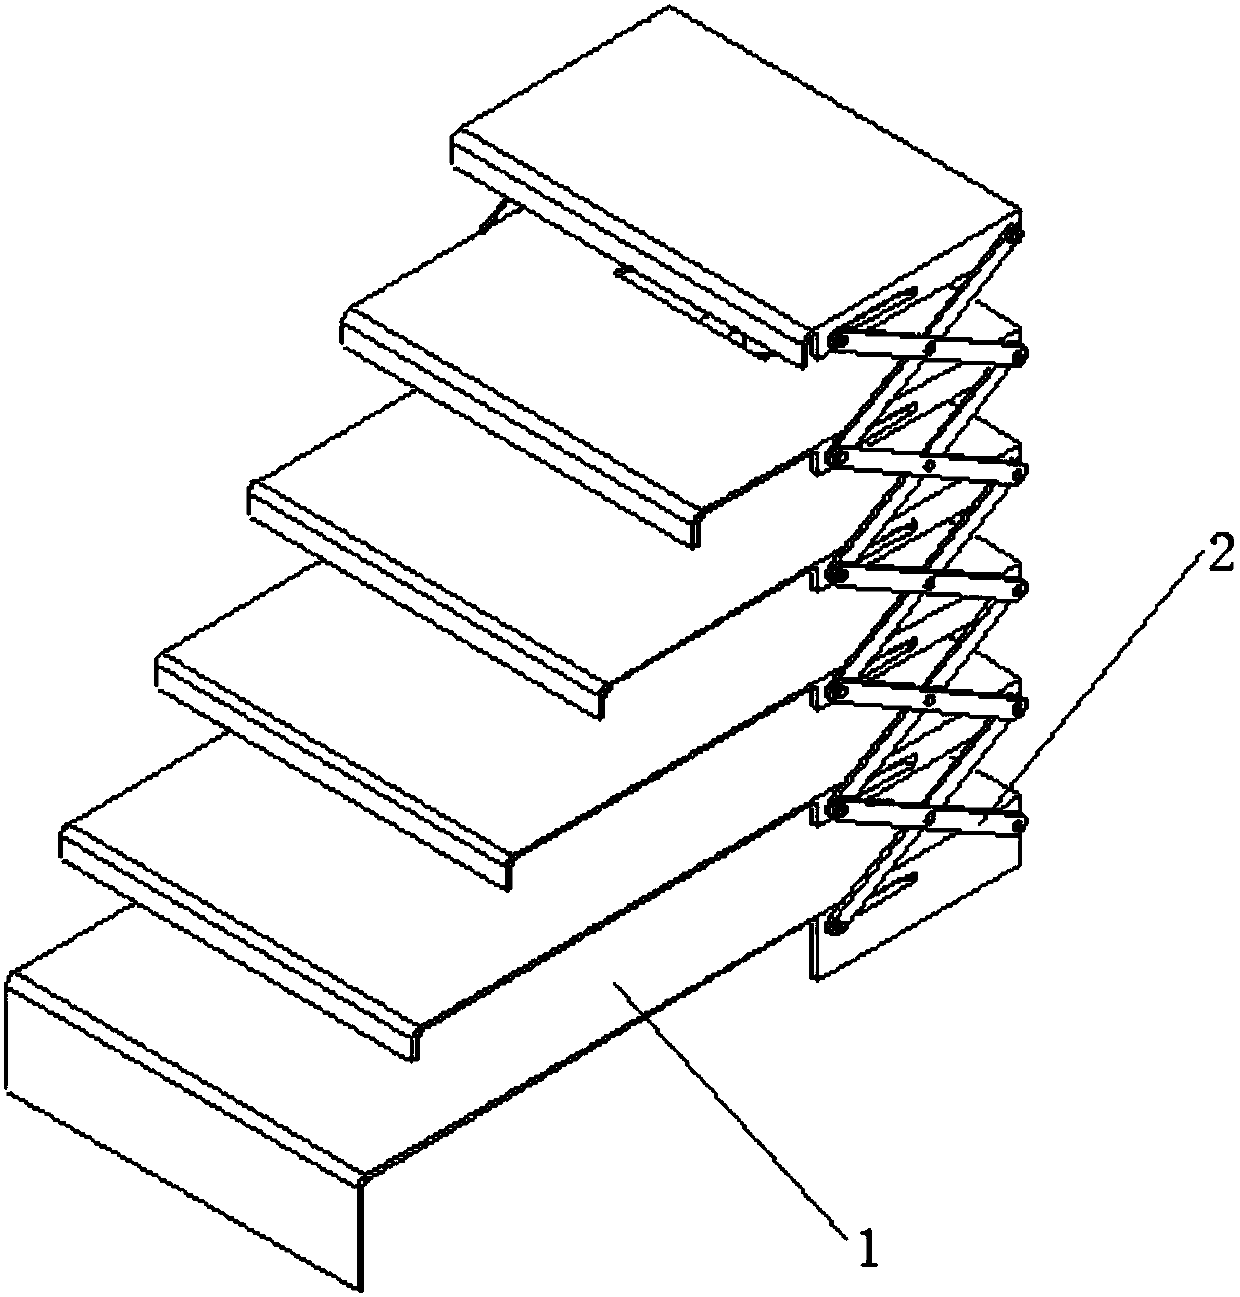 Foldable ladder for CT (computed tomography) examination couch